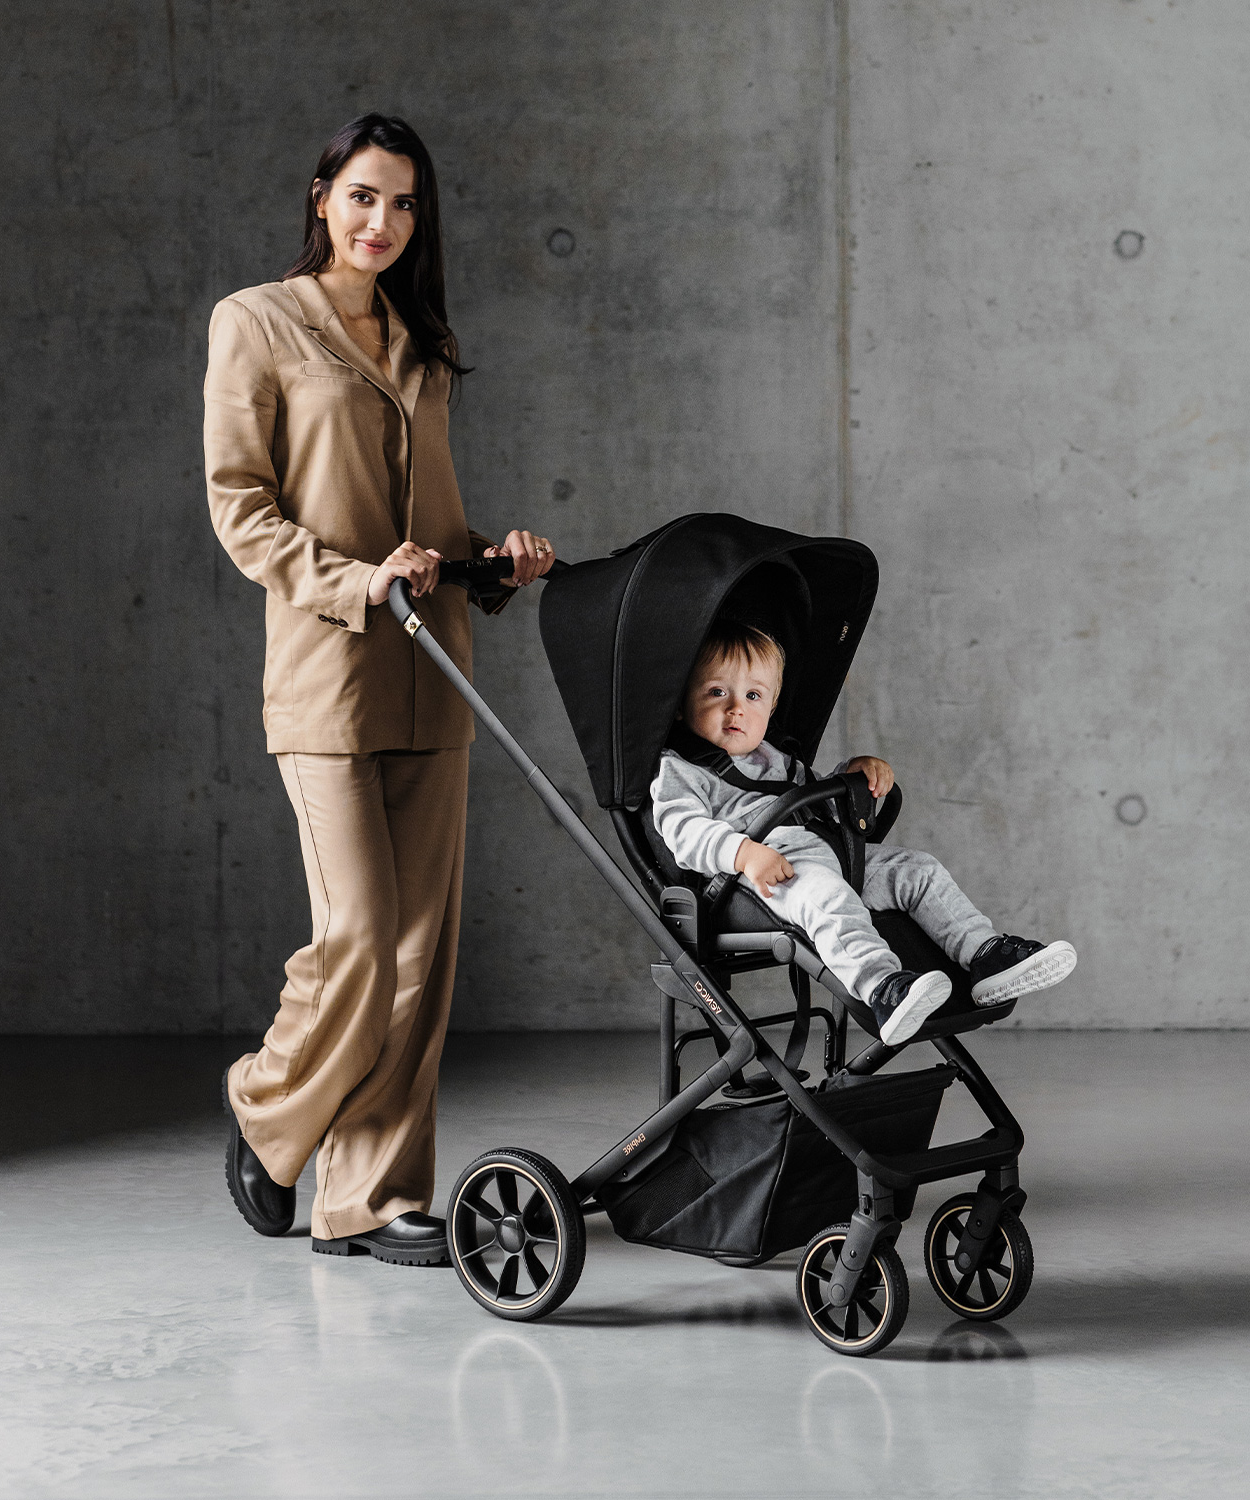 When Can a Baby Sit in a Pushchair?